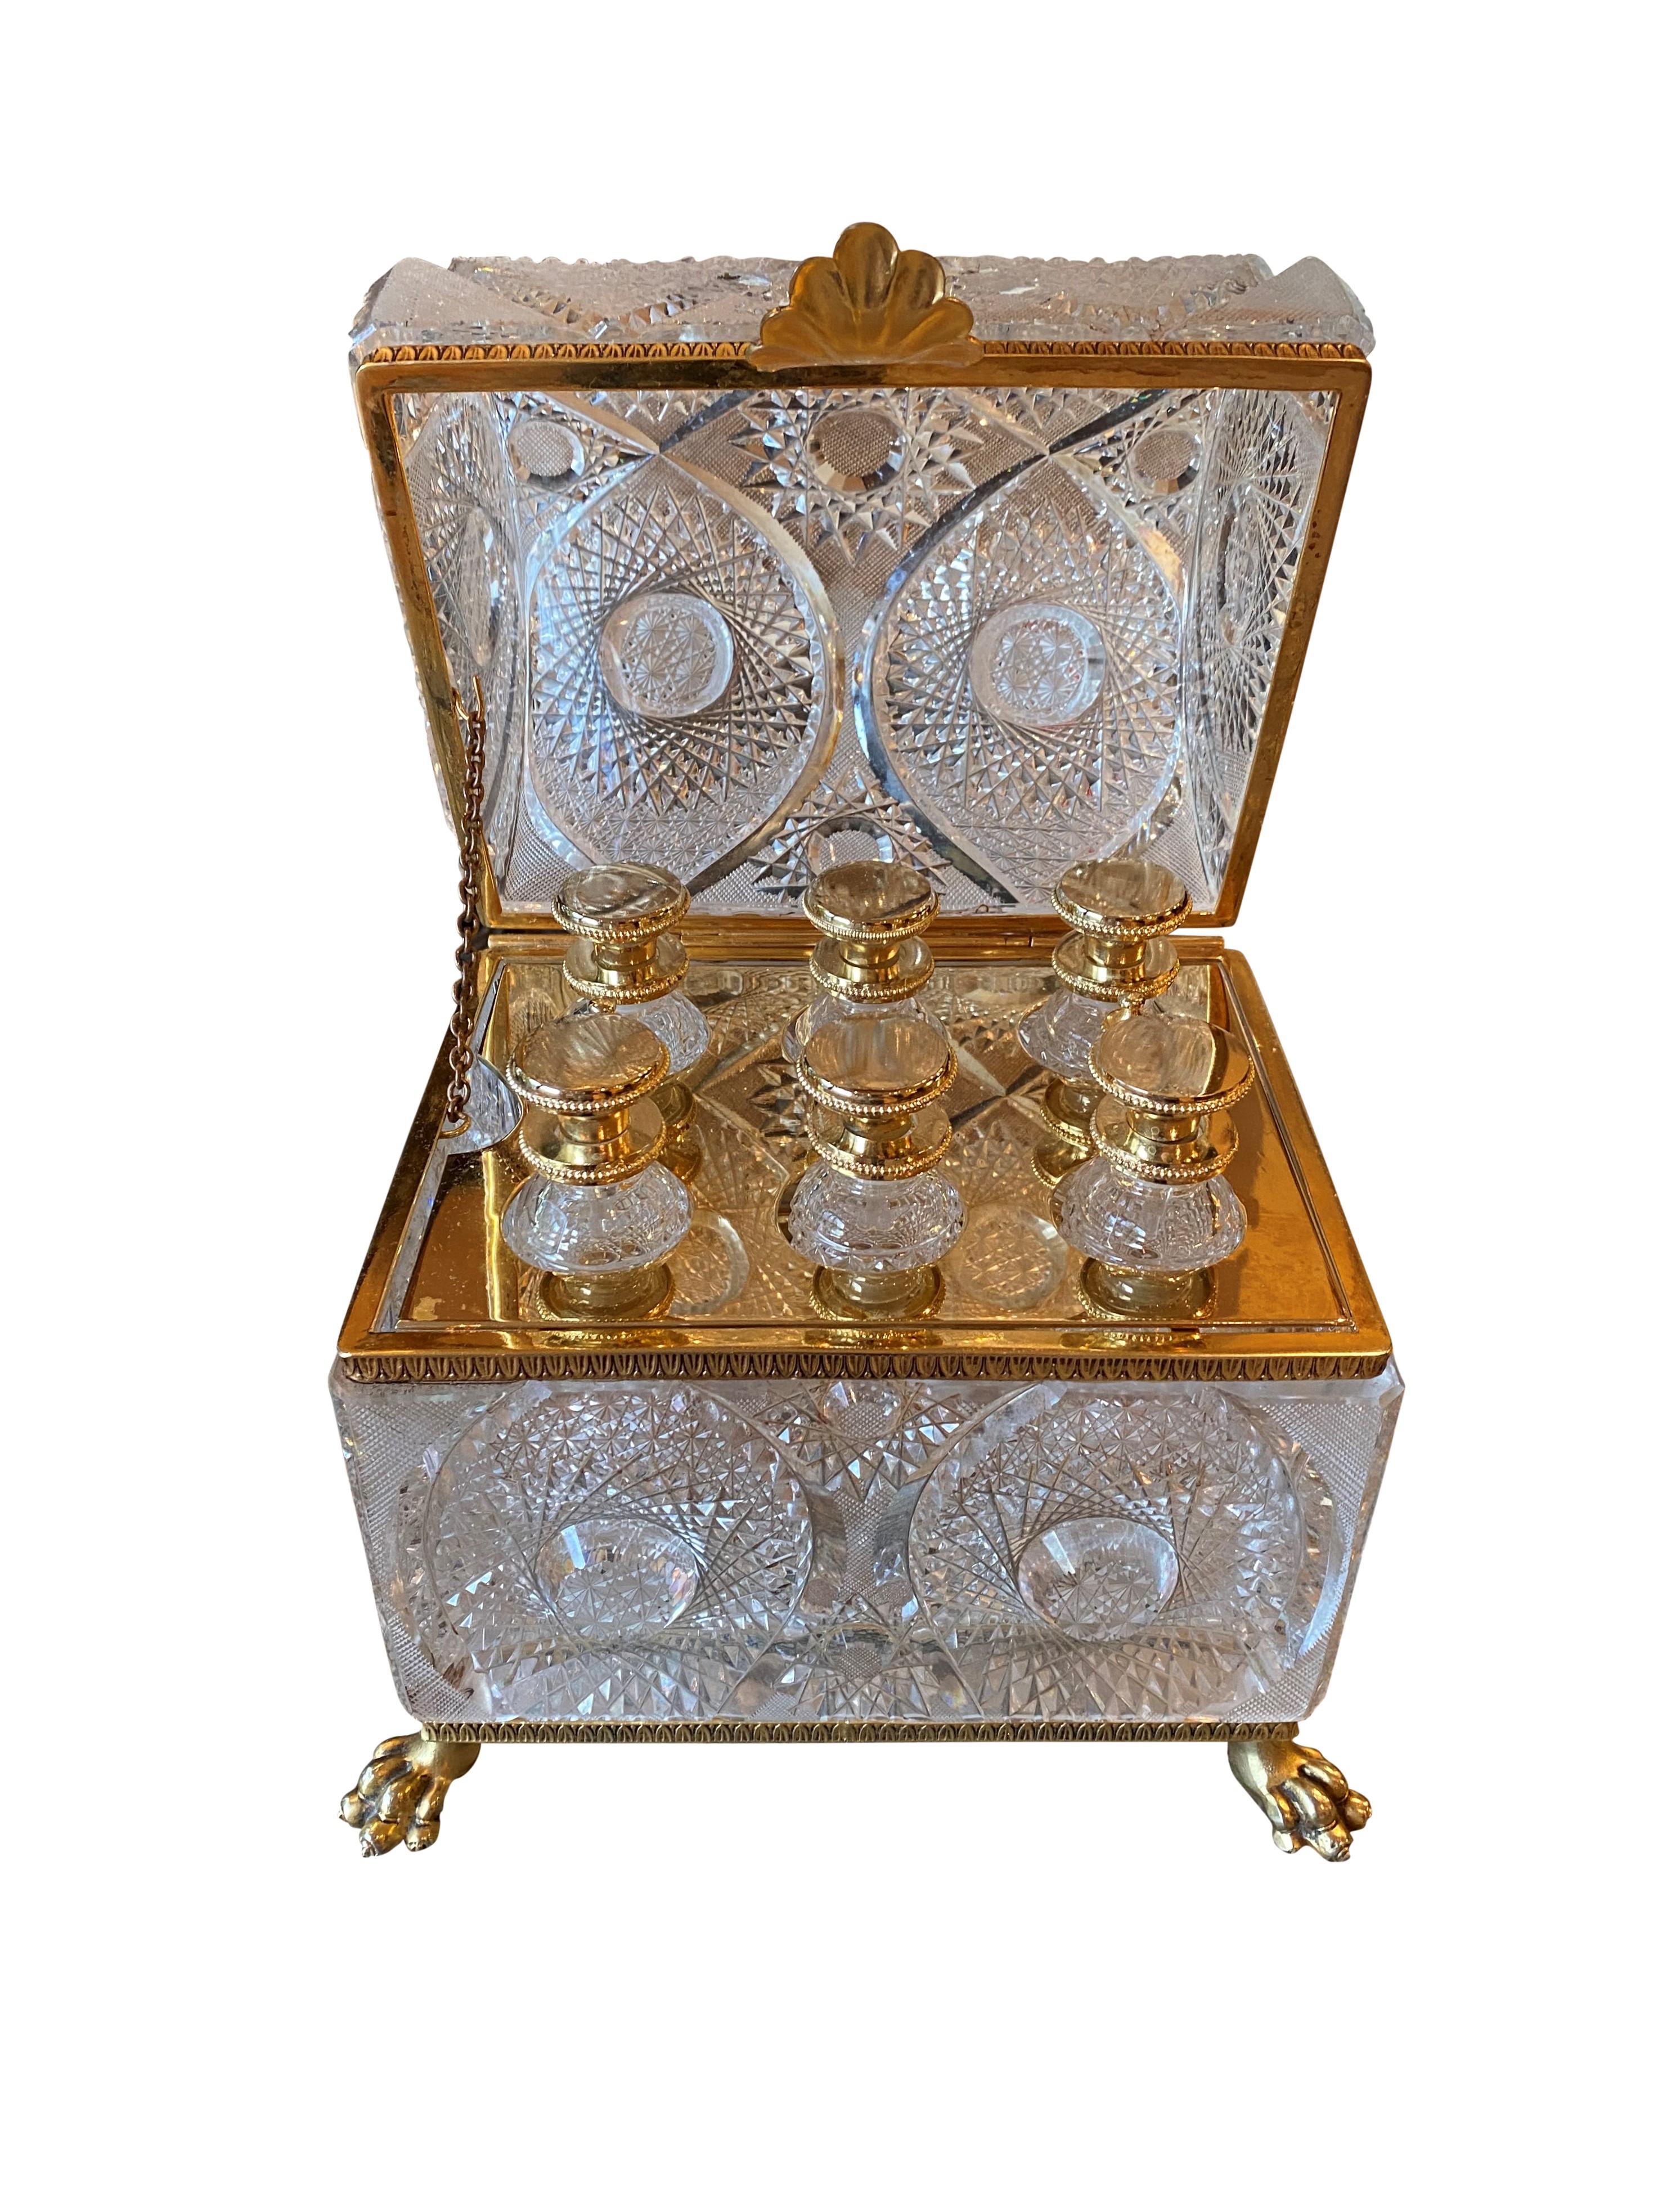 French Gilt Bronze Mounted Cut Glass Domed Casket Cristal Frères, Martin Benito 1